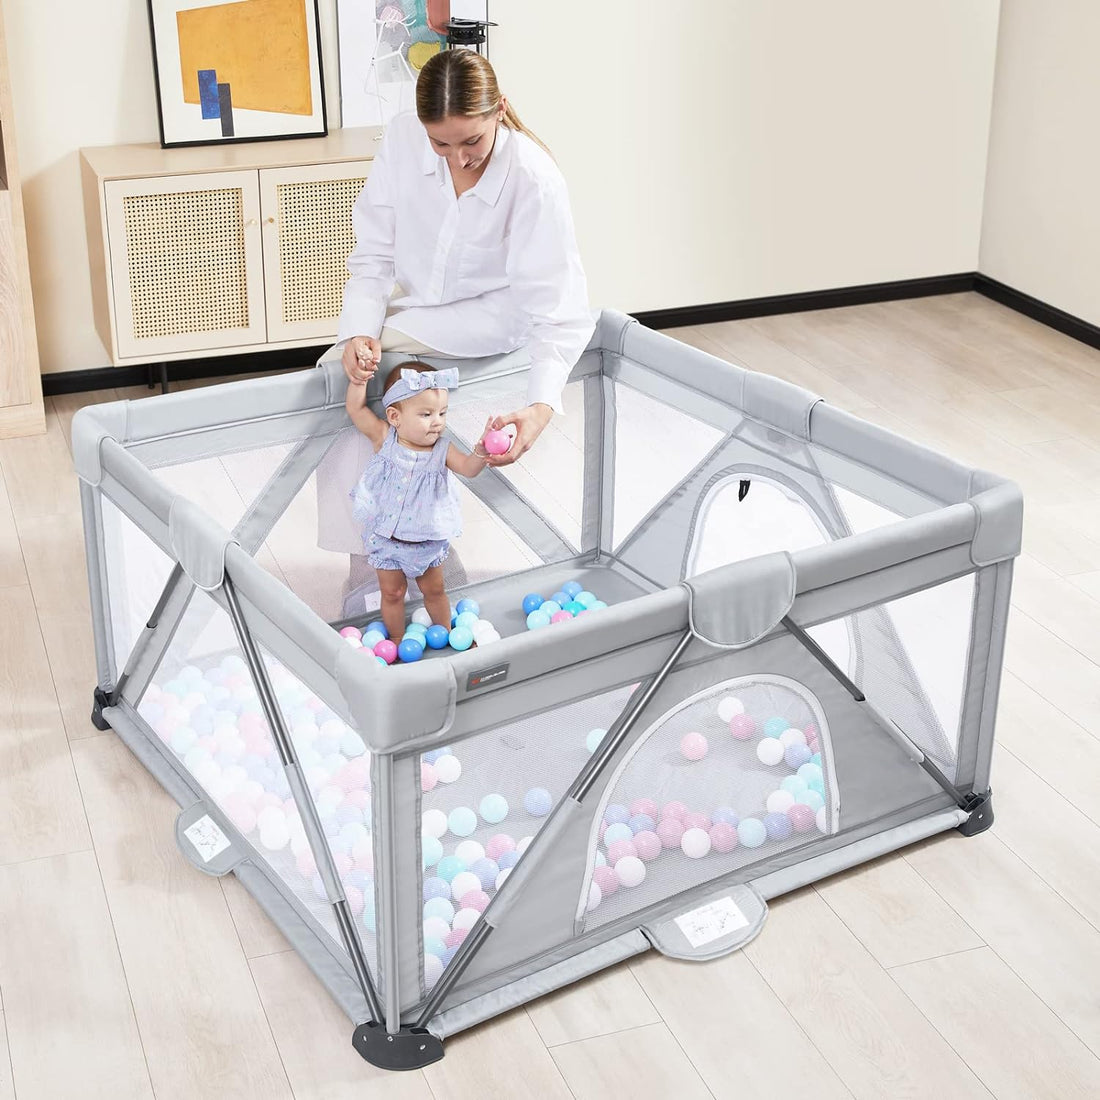 Baby playpen for your child’s safety and healthy growth